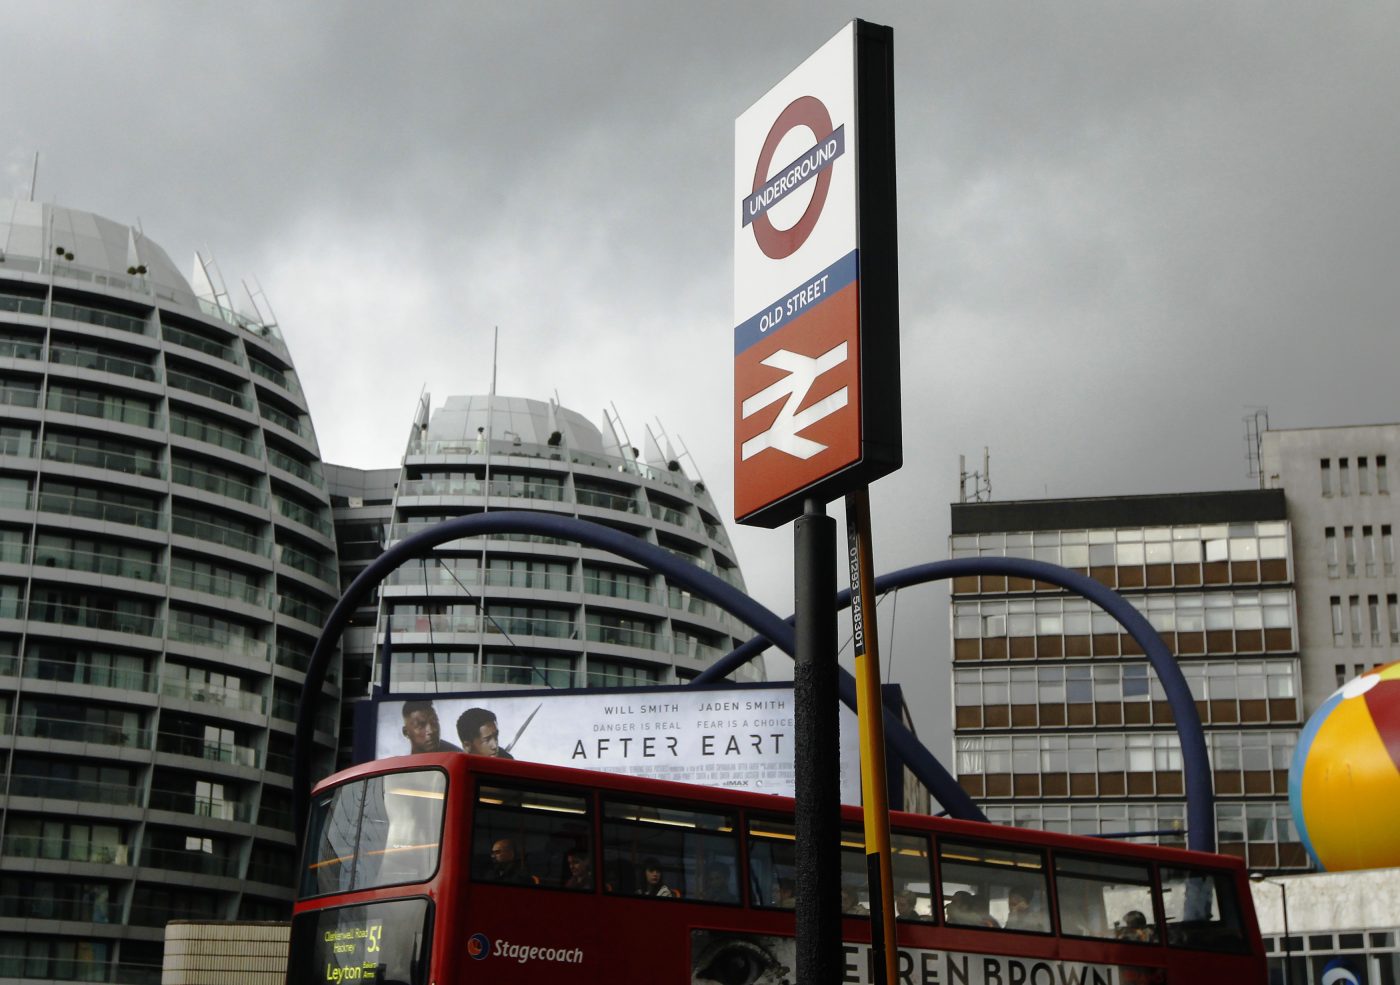 Photo: Buildings surround the Old Street roundabout dubbed "Silicon Roundabout" in London May 28, 2013. Credit: REUTERS/Luke MacGregor.